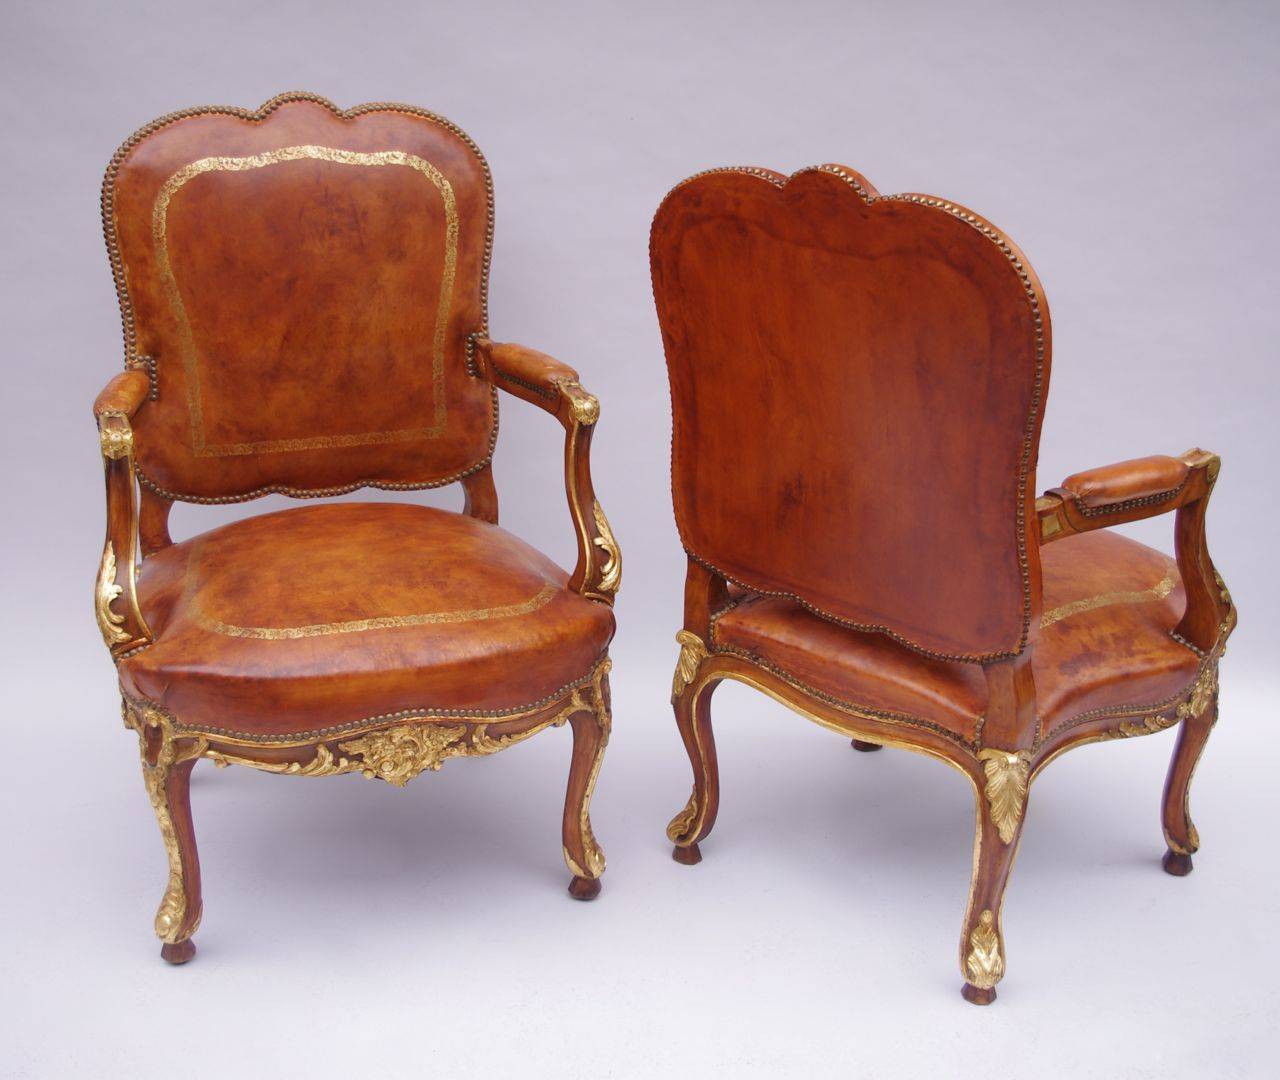 . Brown leather
. Louis XV style
. Curved feet
. Foliages sculpted on the armerests, and feet
. Gold leaf highlights
. Work from 1950